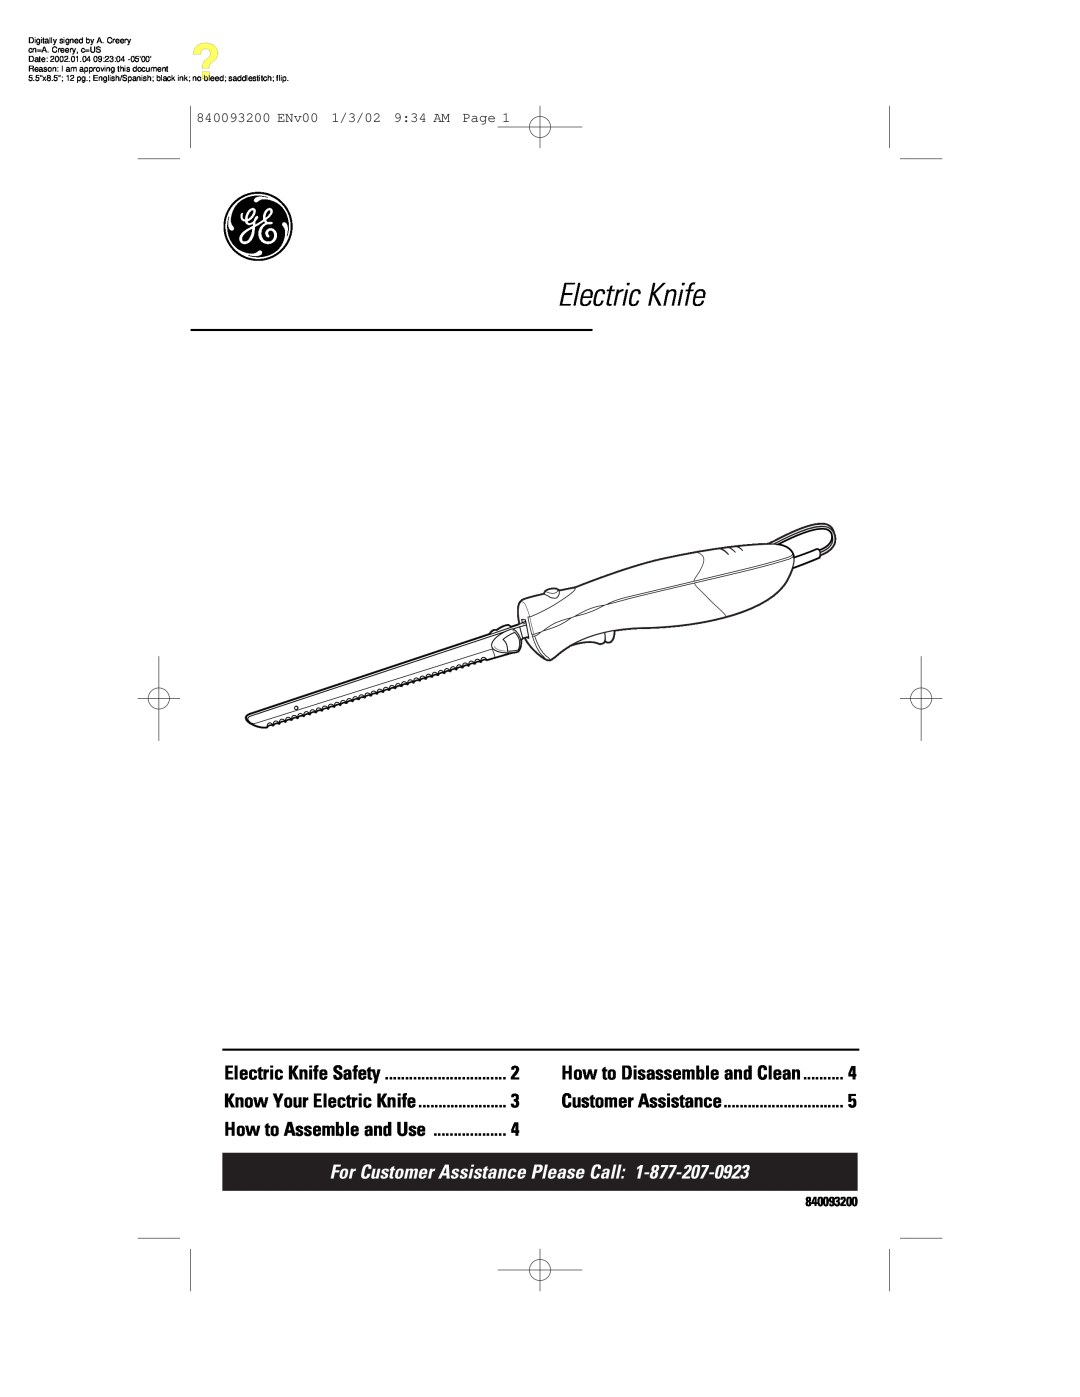 GE 106612 manual For Customer Assistance Please Call, Electric Knife Safety, Know Your Electric Knife, 840093200 